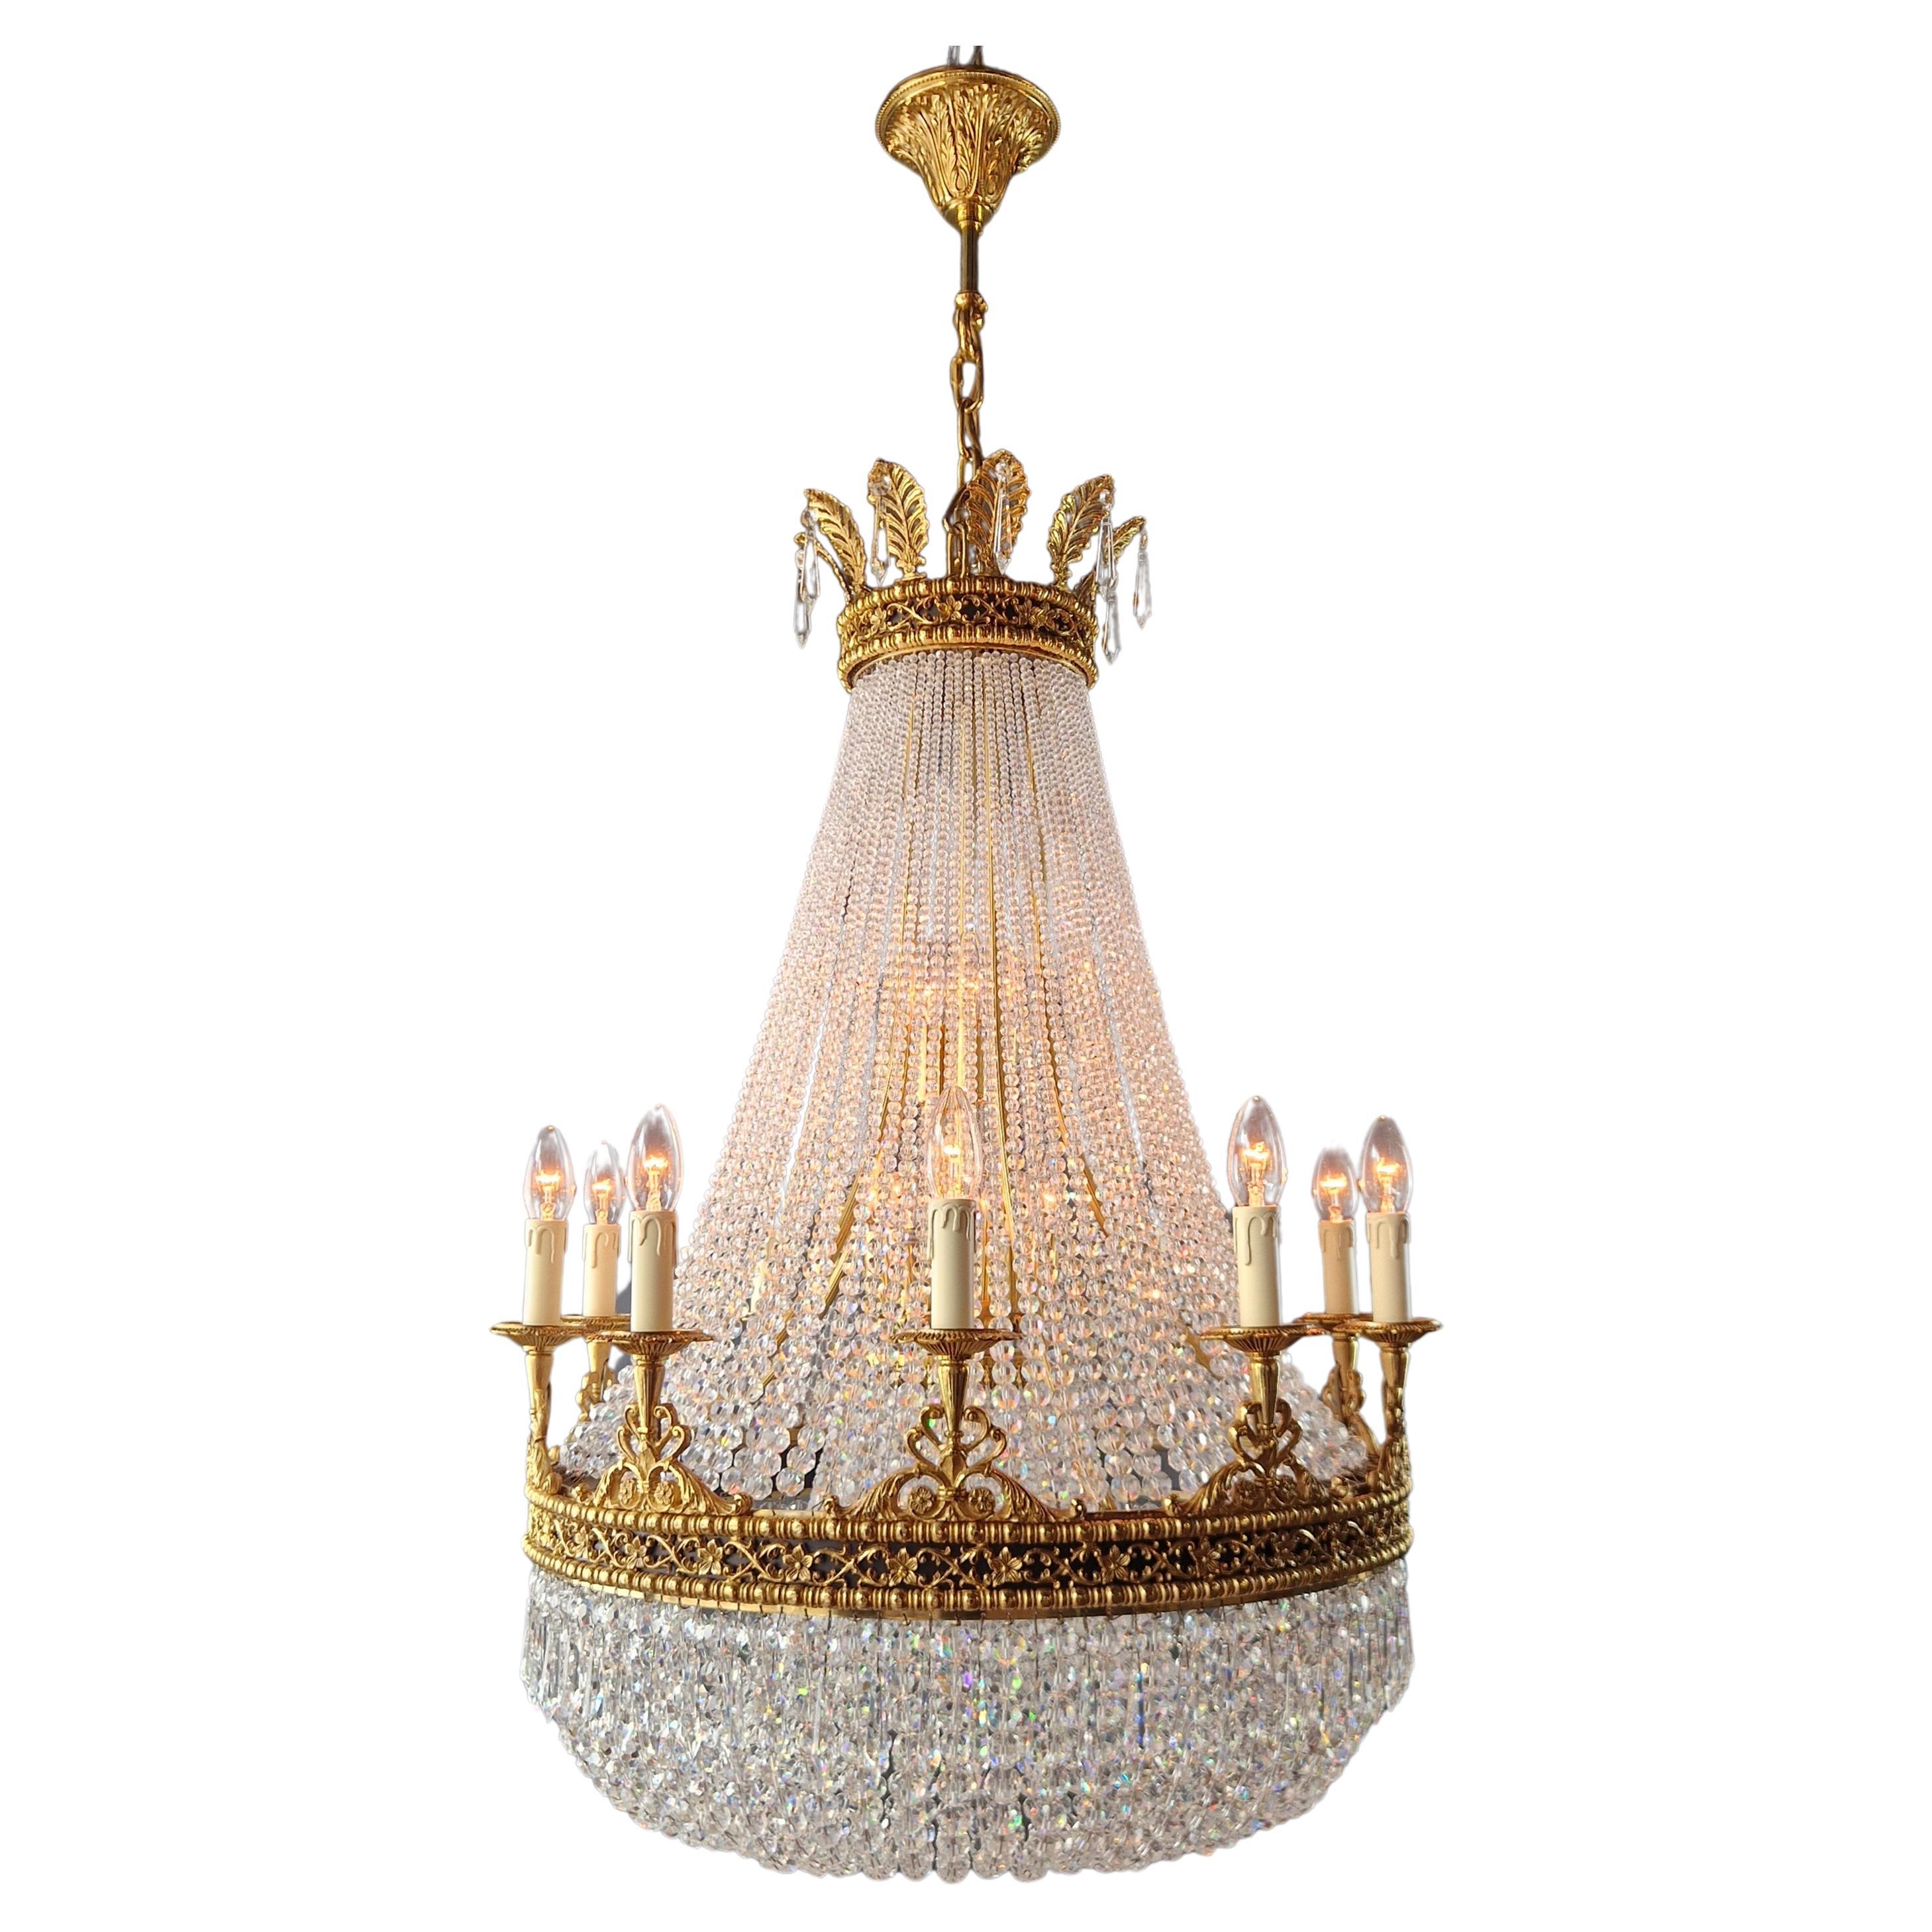 Brass Basket Empire Sac a Pearl Chandelier Beaded Crystal Lustre Lamp Antique